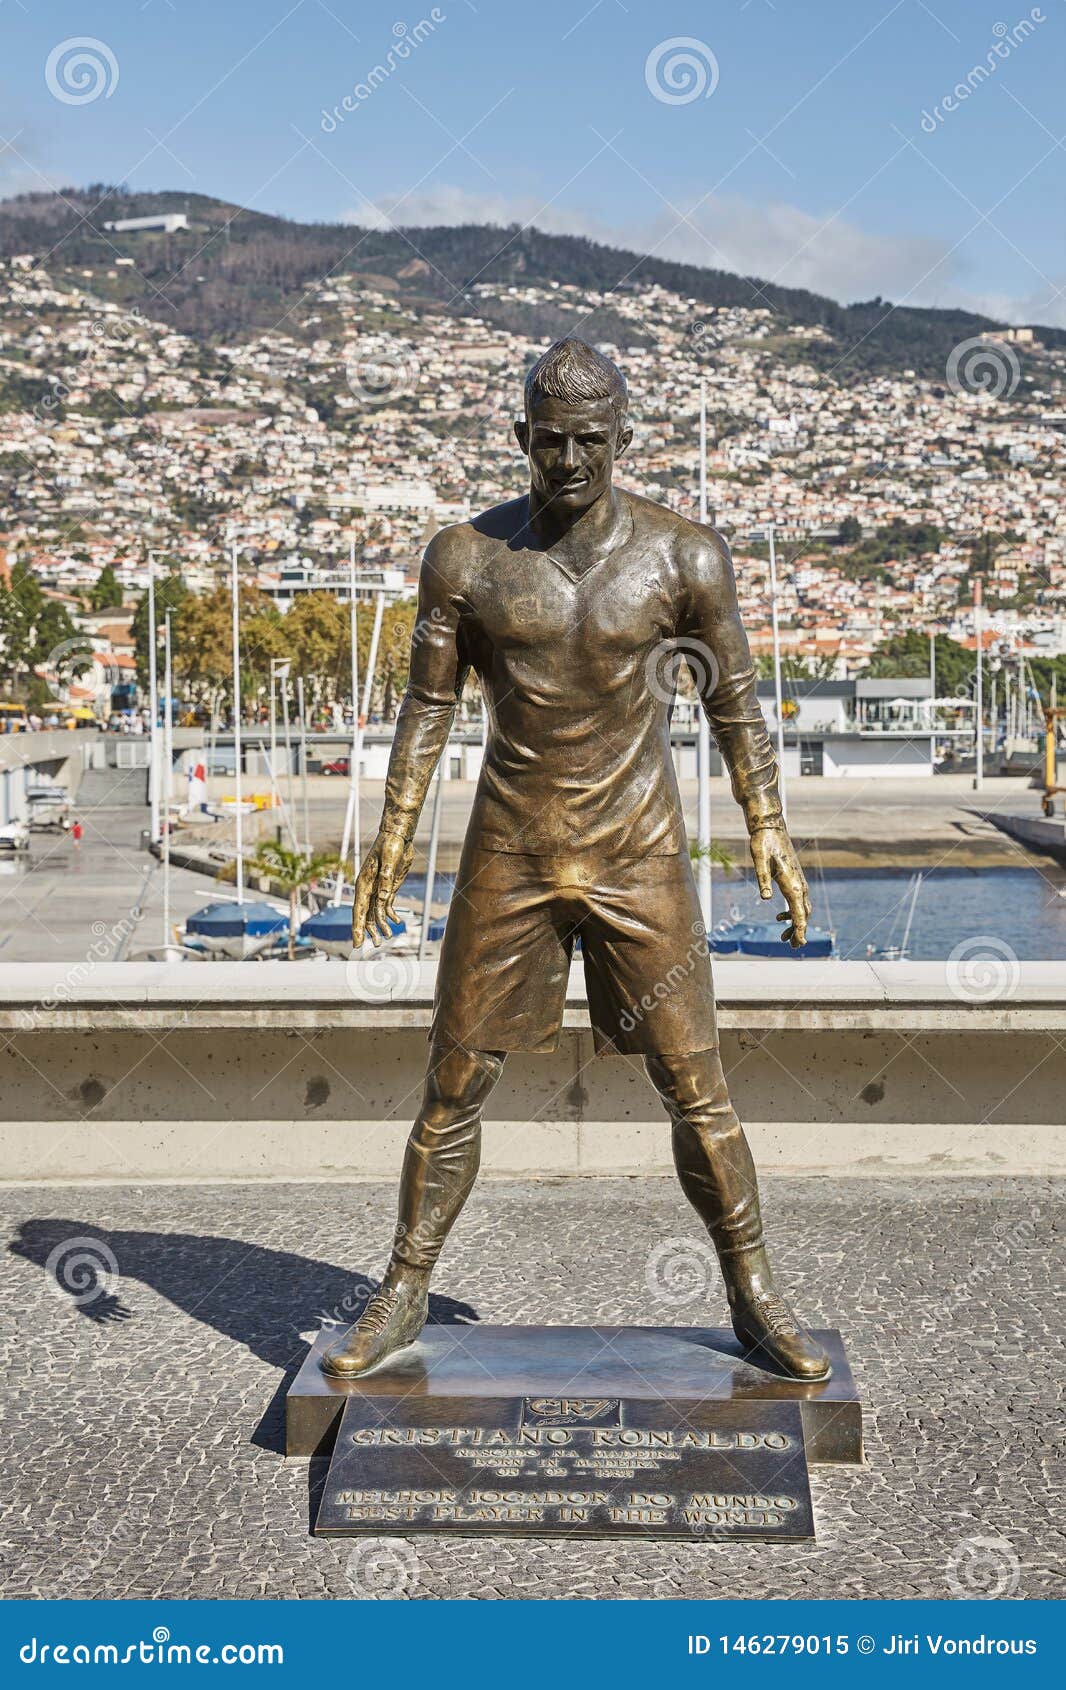 The Statue of Cristiano Ronaldo in Front of the Entry To the Museum CR